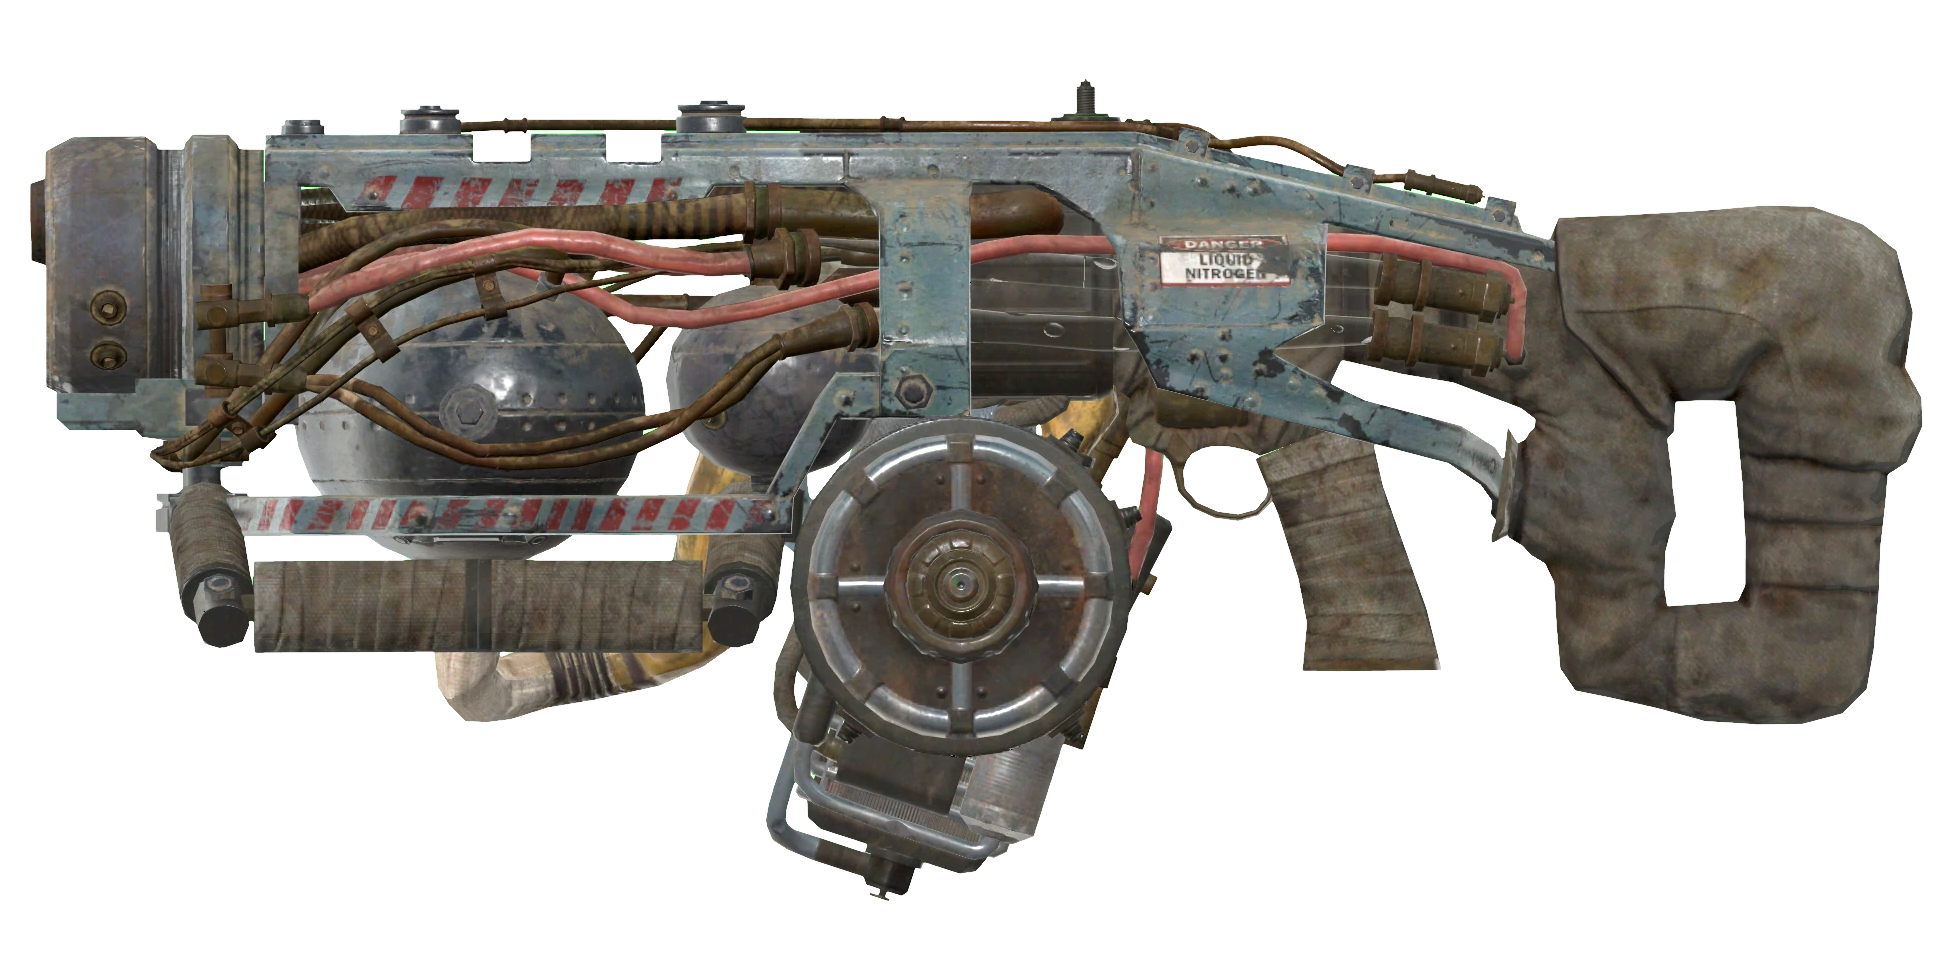 http://vignette1.wikia.nocookie.net/fallout/images/c/c2/Cryolator_(Fallout_4).png